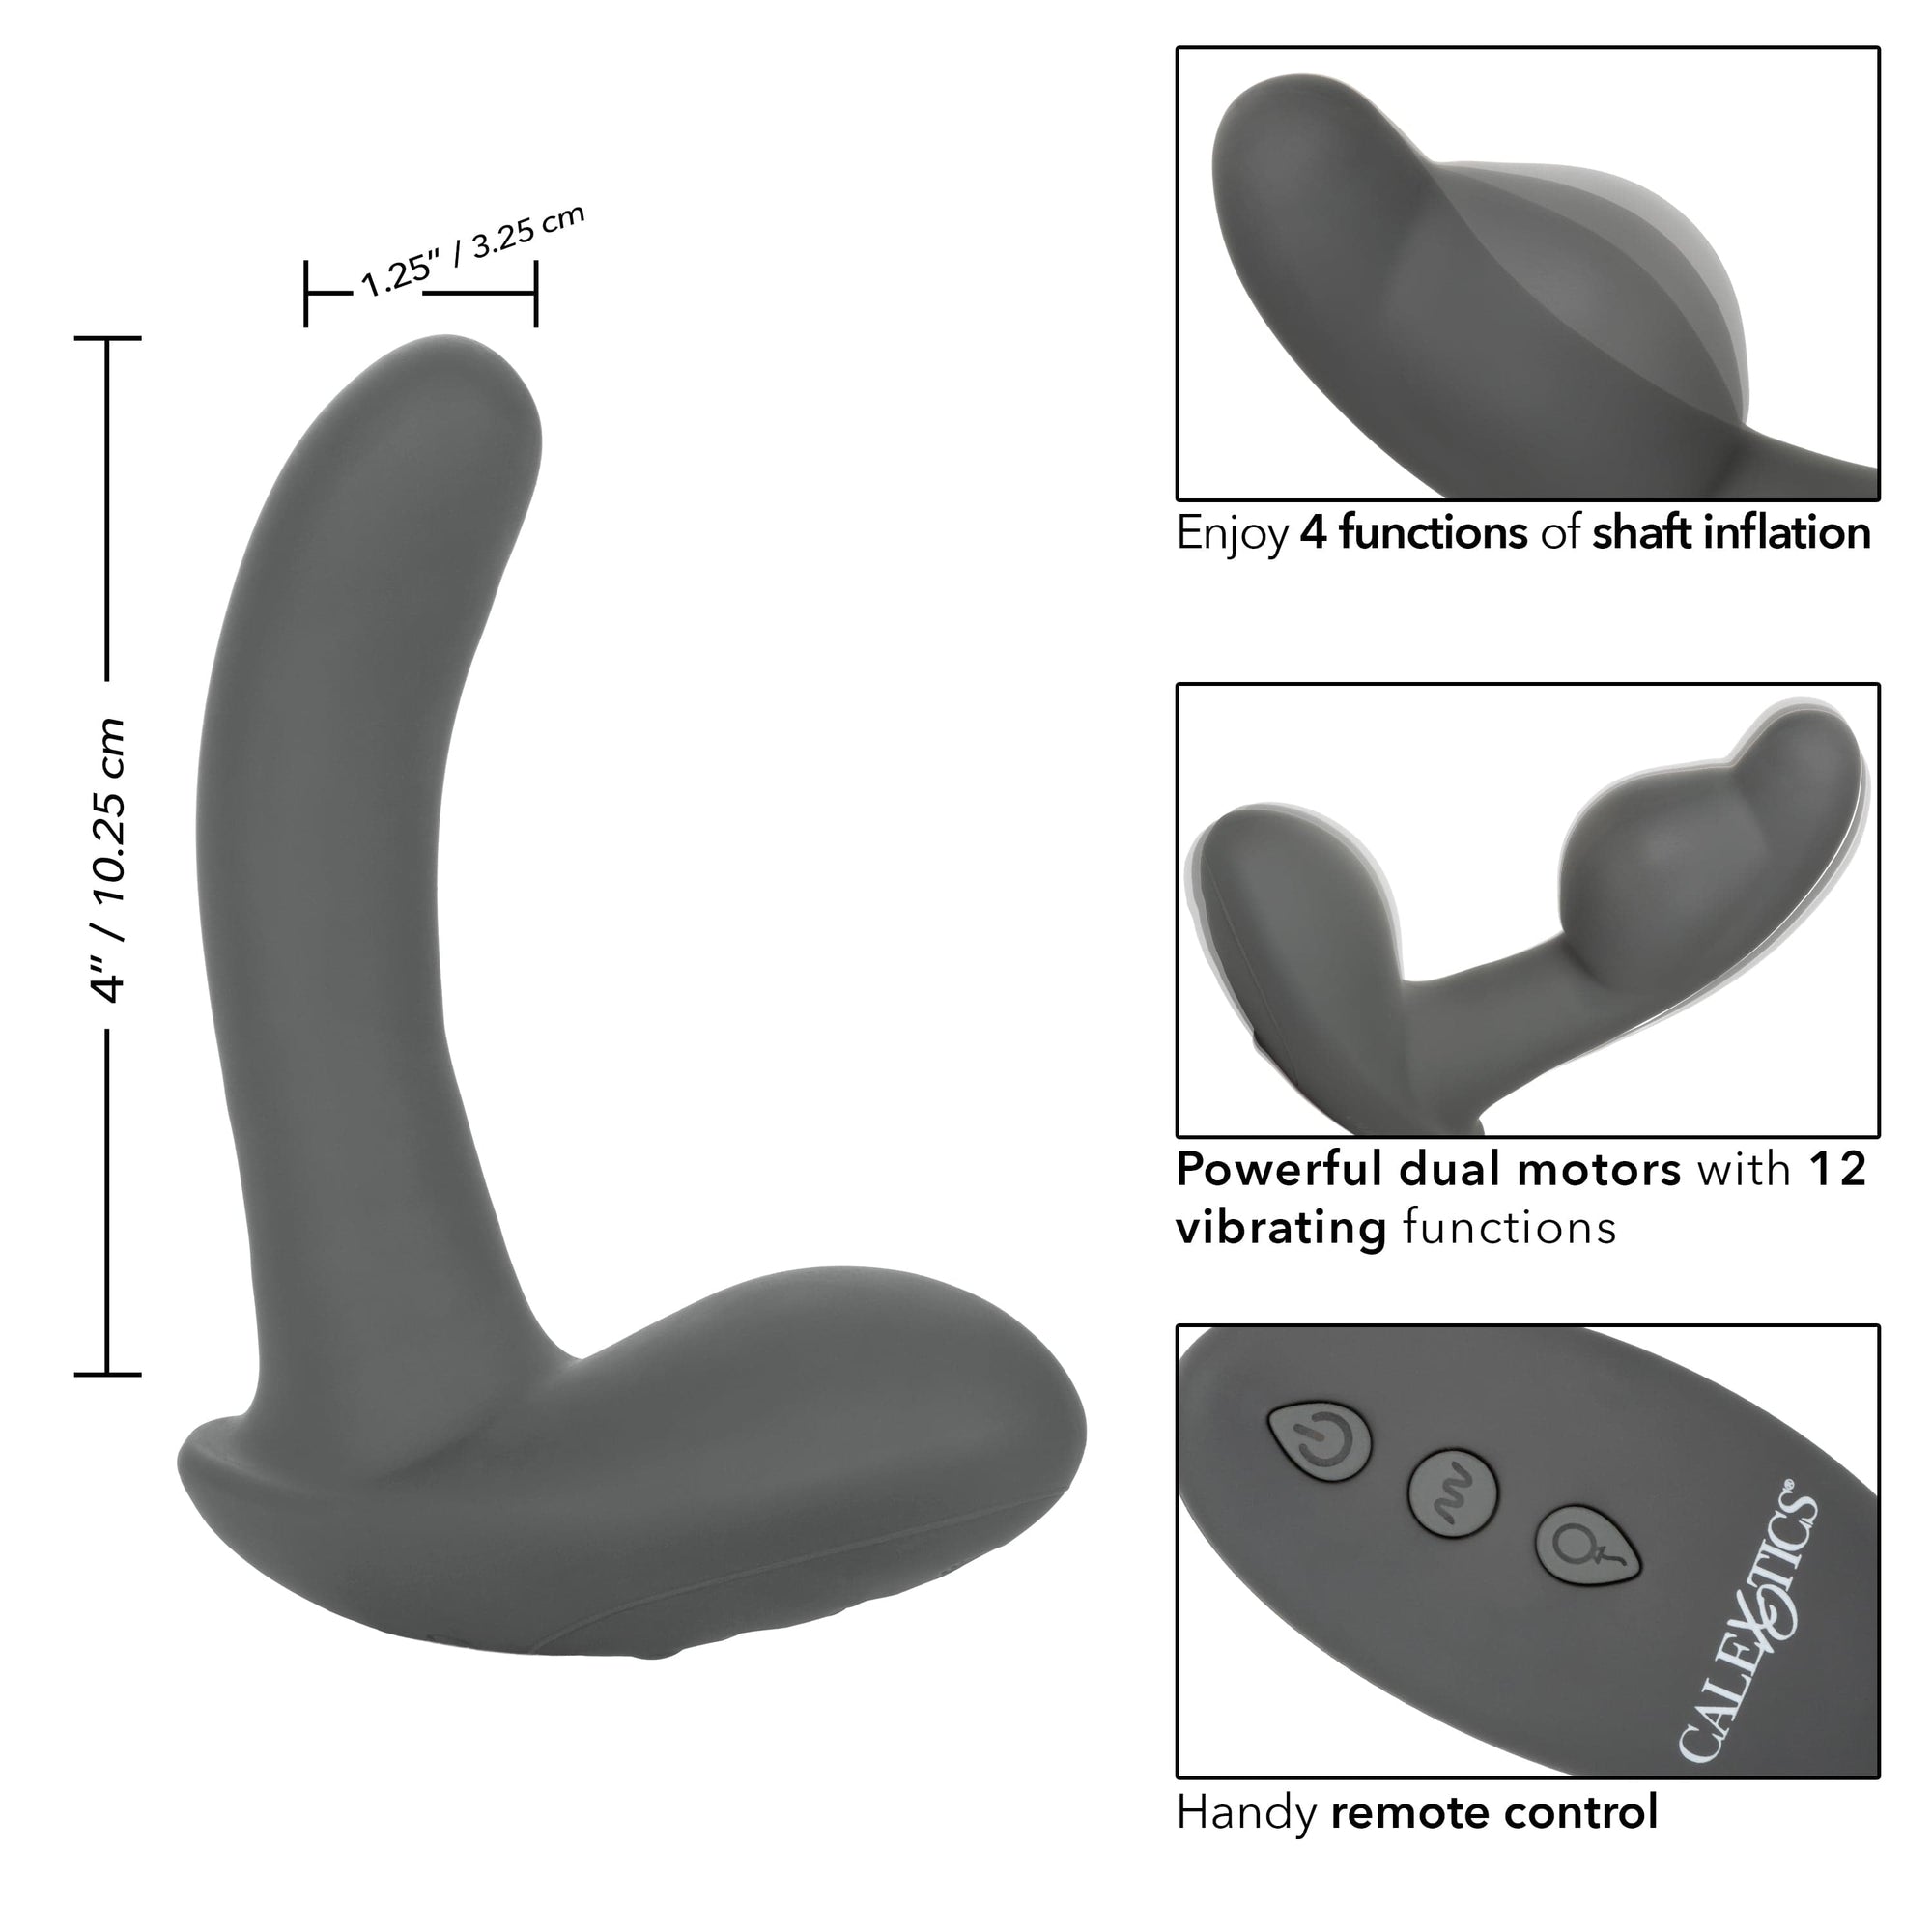 California Exotics - Eclipse Remote Control Inflatable Probe Prostate Massager (Black) Prostate Massager (Vibration) Rechargeable 716770098153 CherryAffairs